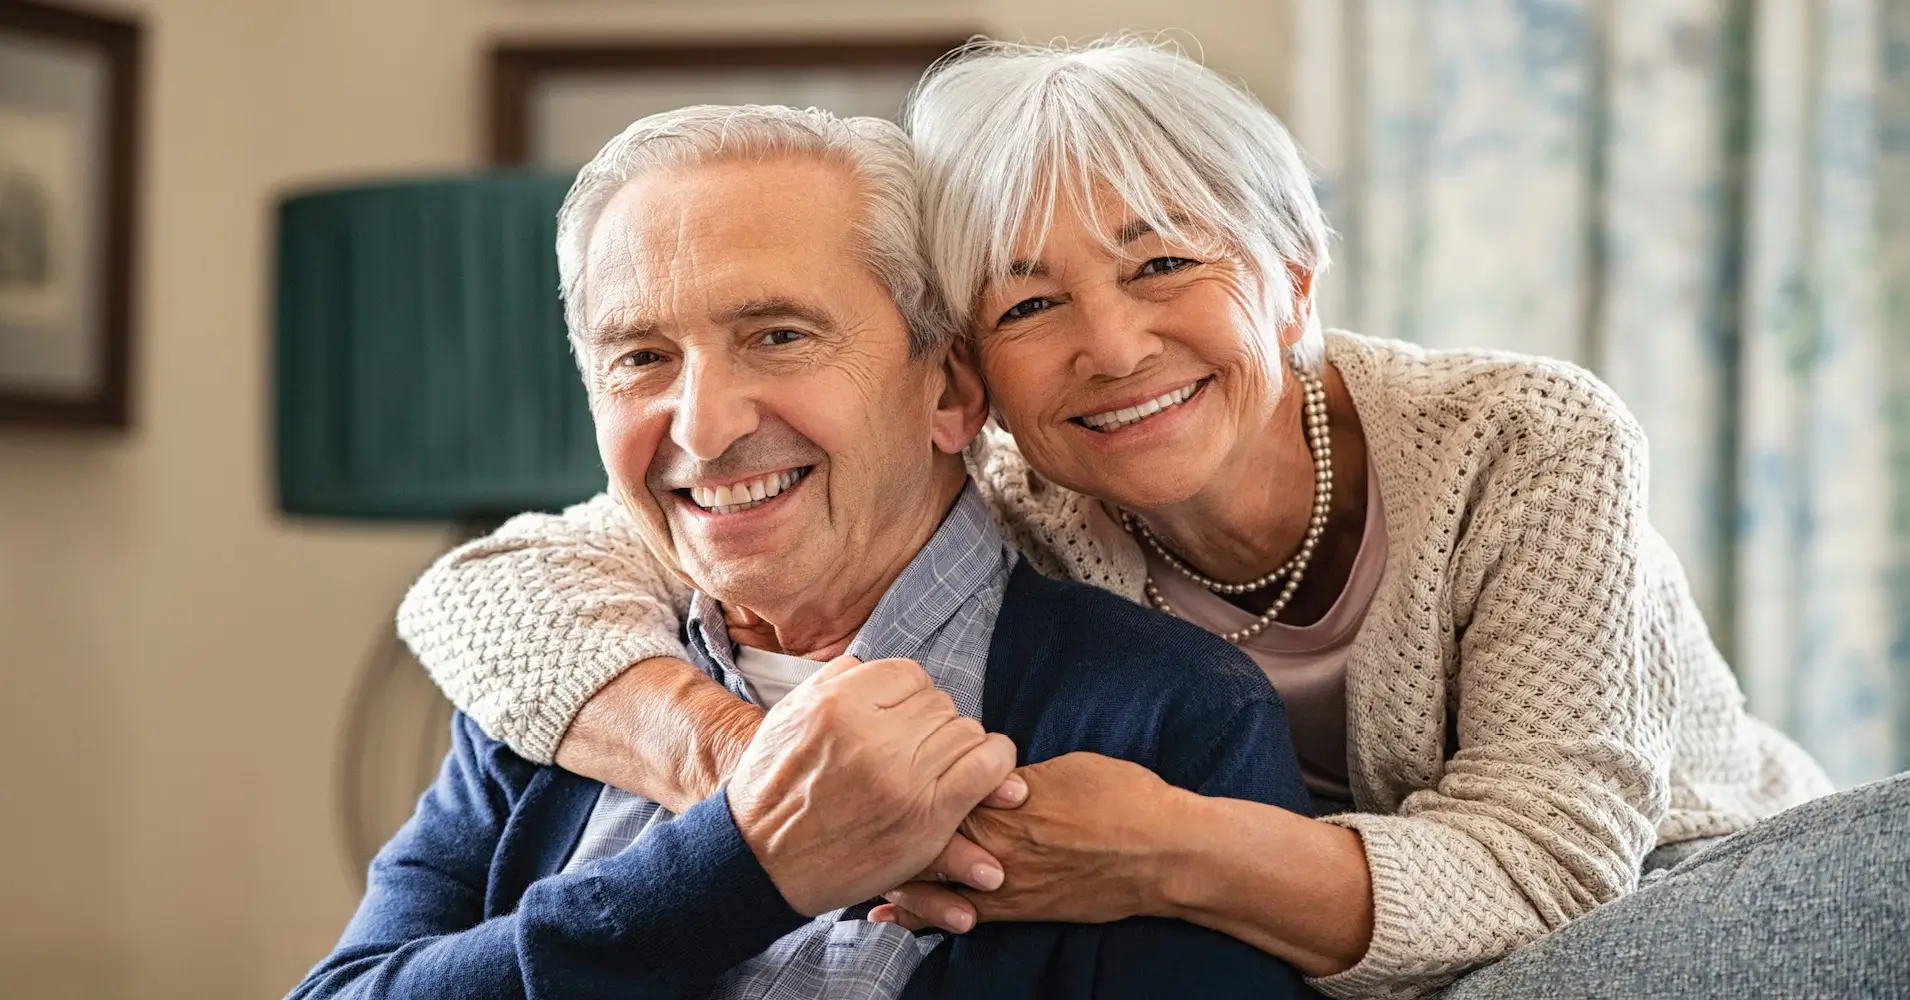 Portrait of romantic senior man with his beautiful wife stay at home. Smiling and caring old woman embracing from behind her retired husband sitting on couch. Cheerful old couple looking at camera.